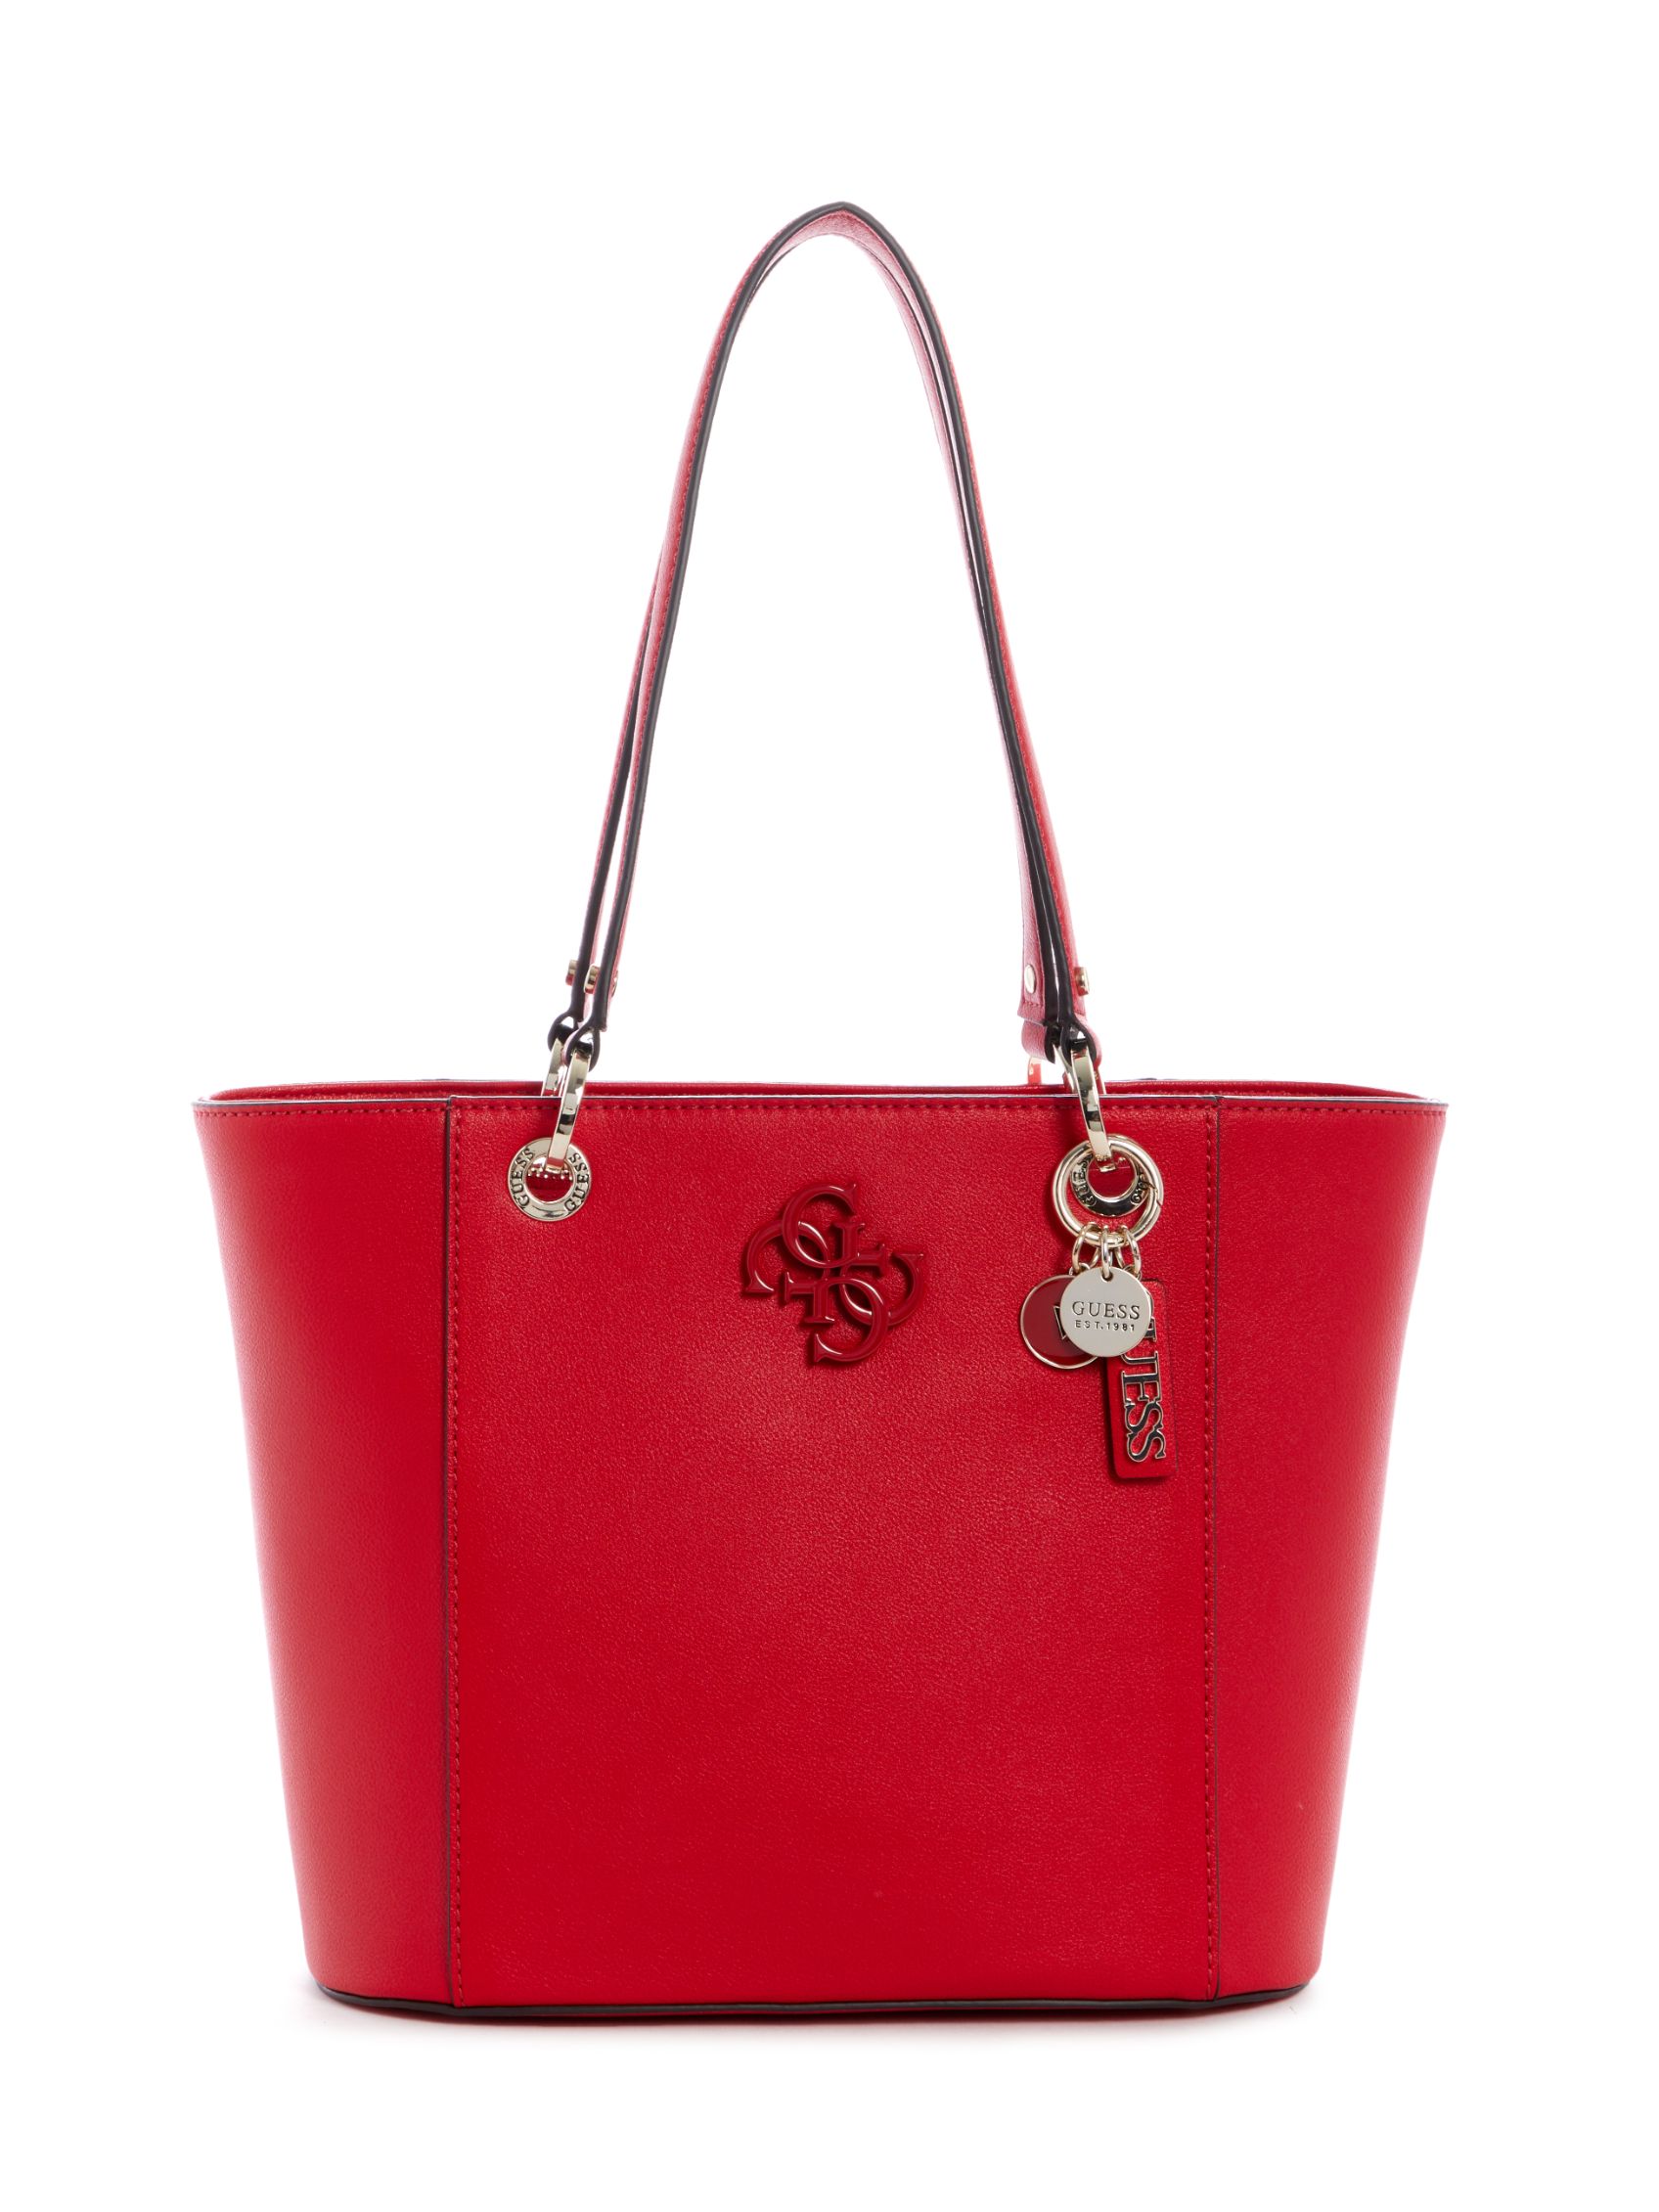 NOELLE SMALL ELITE TOTE | Guess Philippines